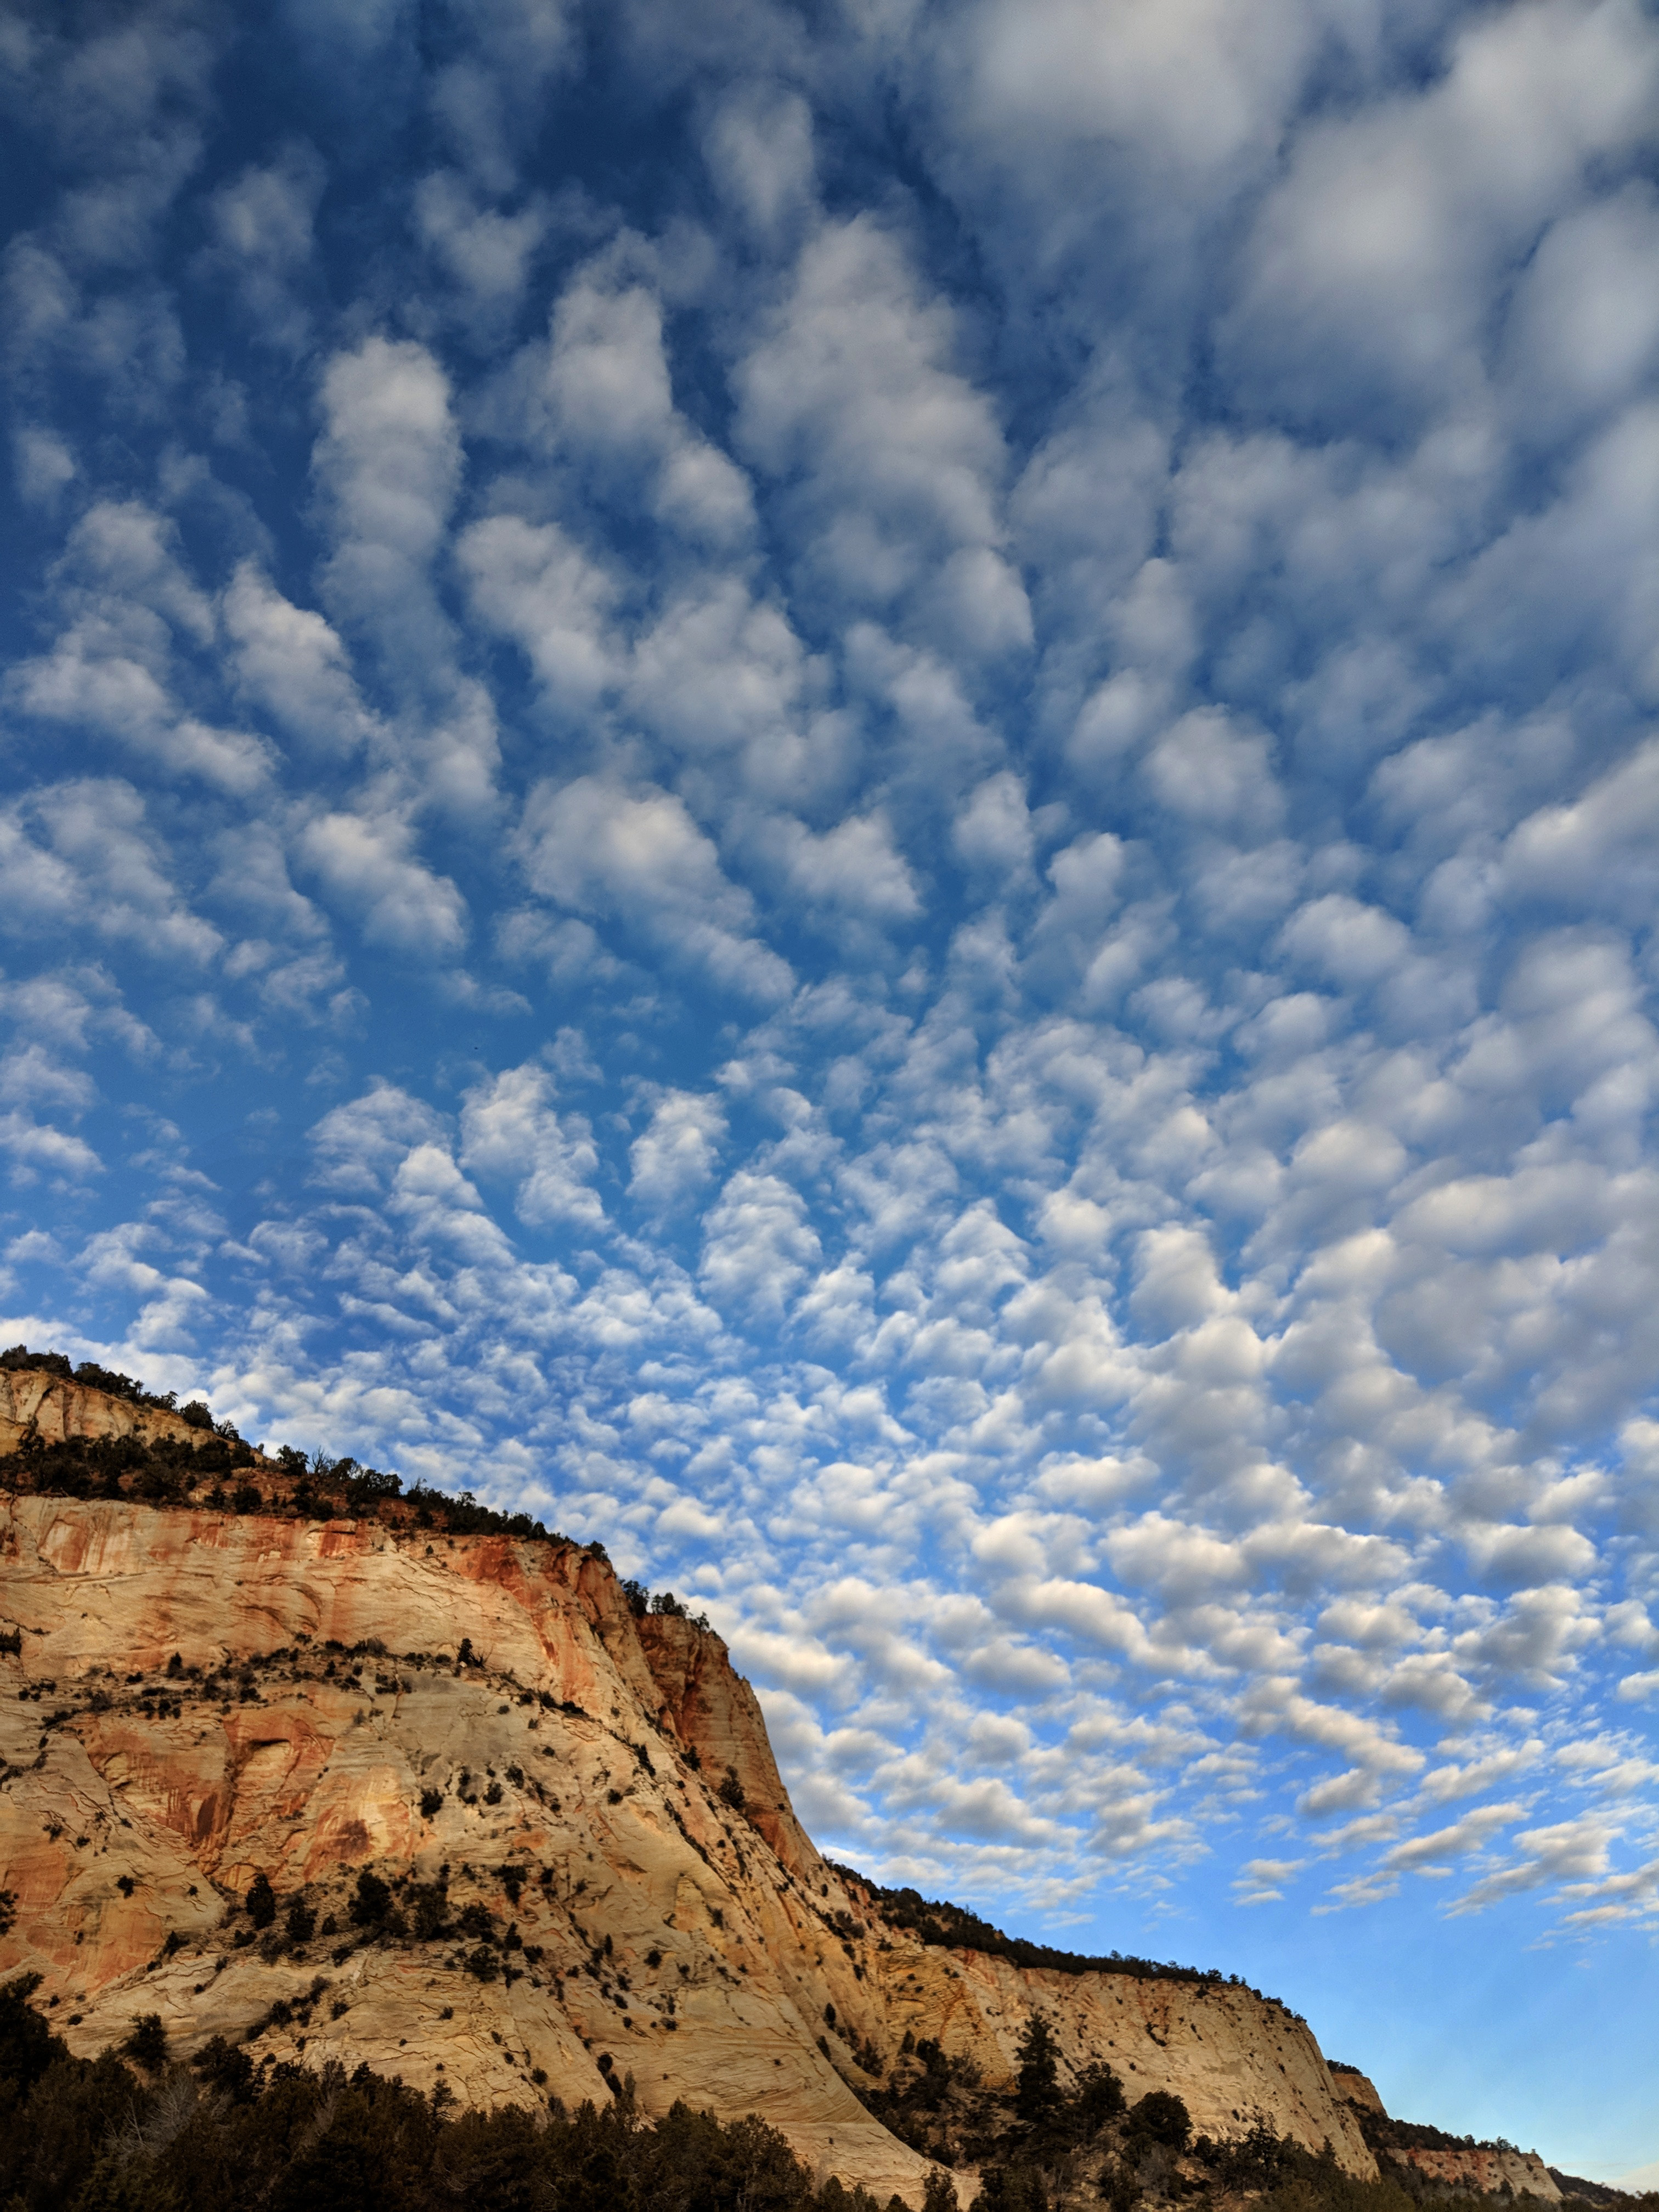 Funky Skies At Zion Today